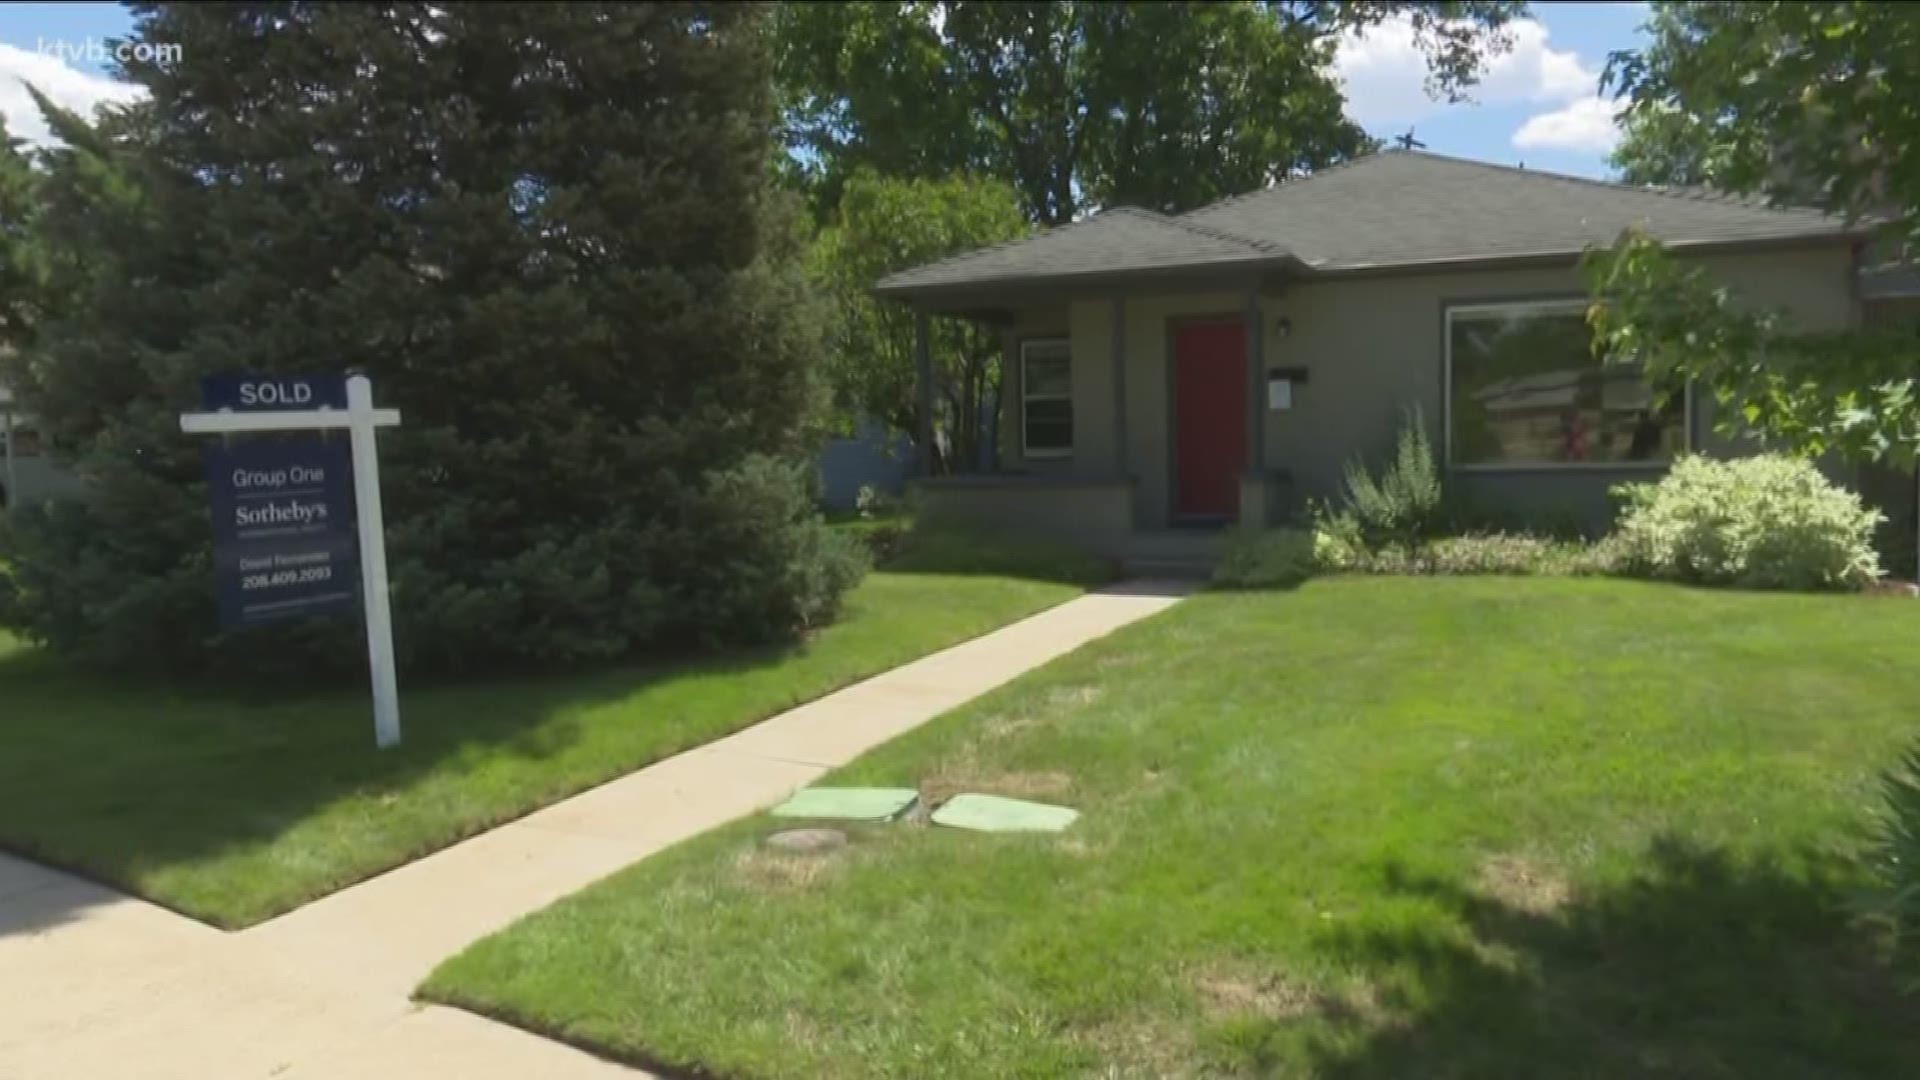 Realtor catches scammer trying to rent Boise home | ktvb.com